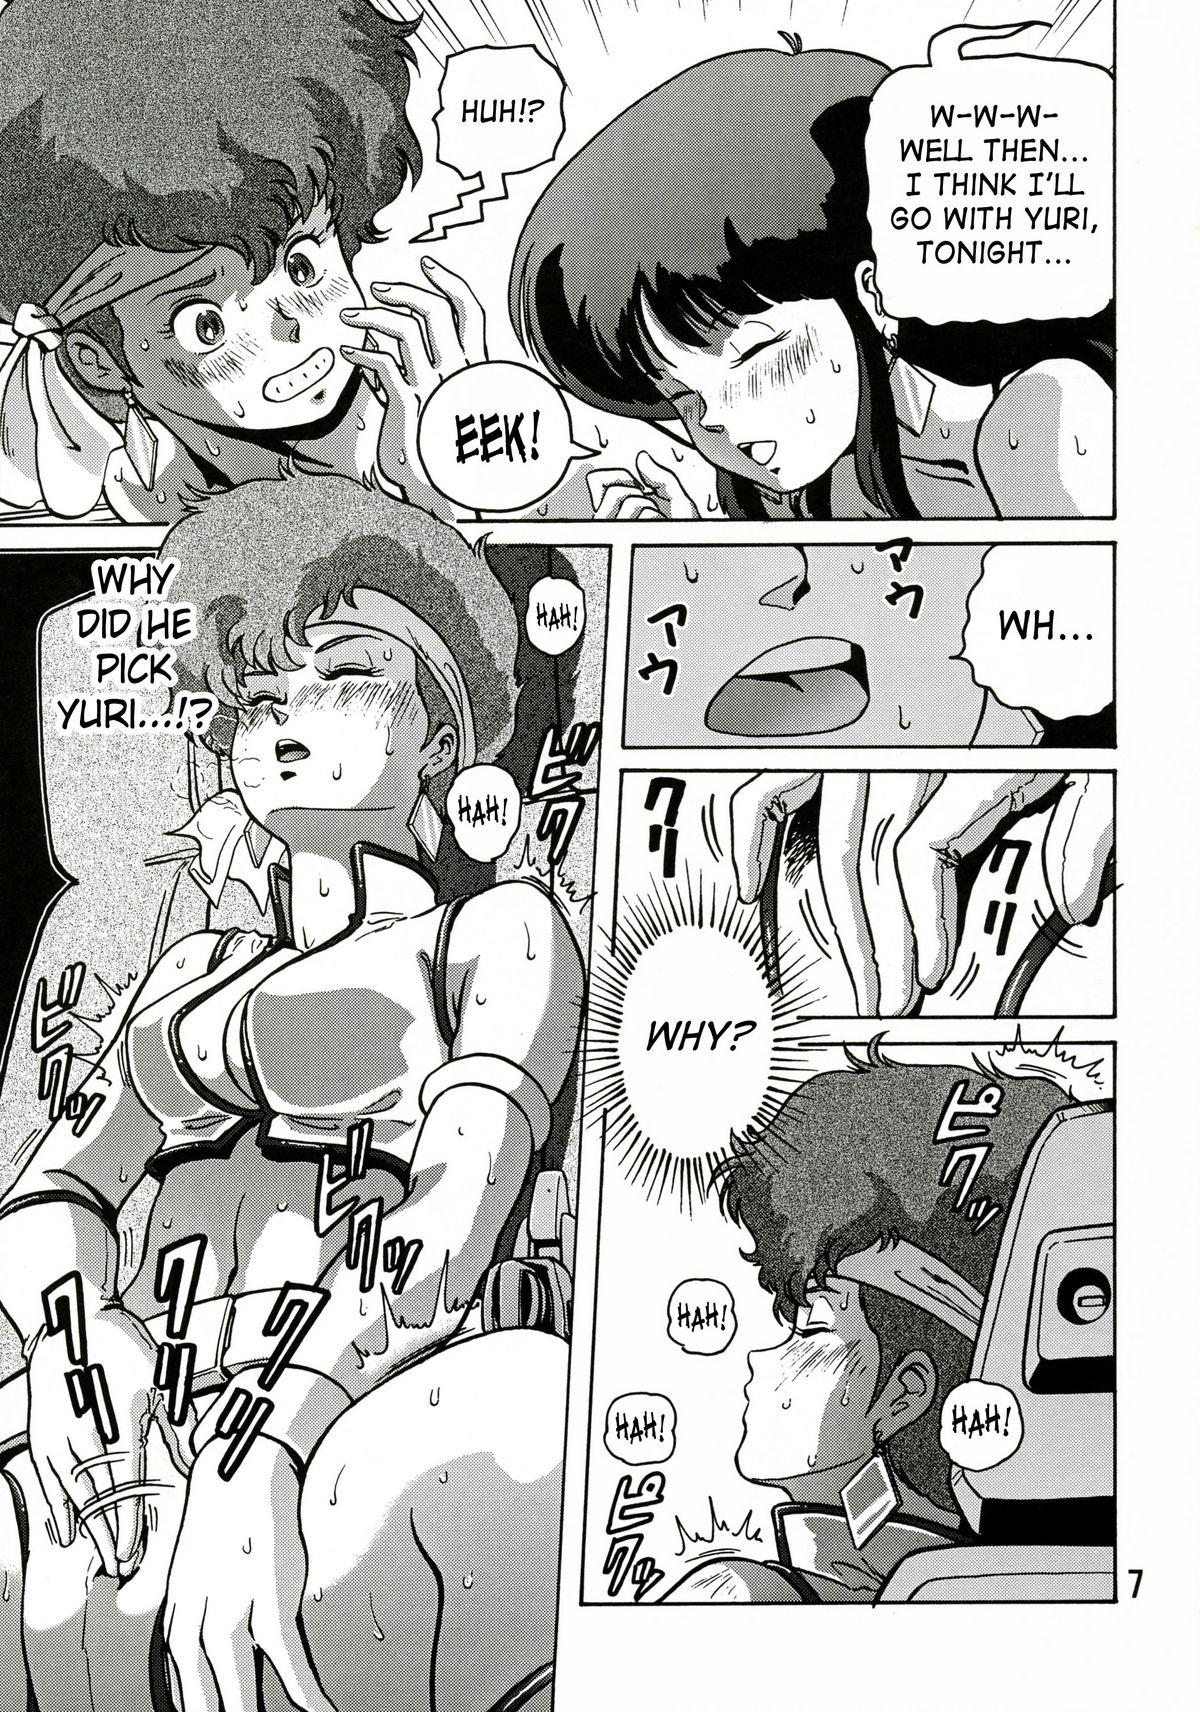 Roundass Love Angel 2 - Dirty pair Calle - Page 6